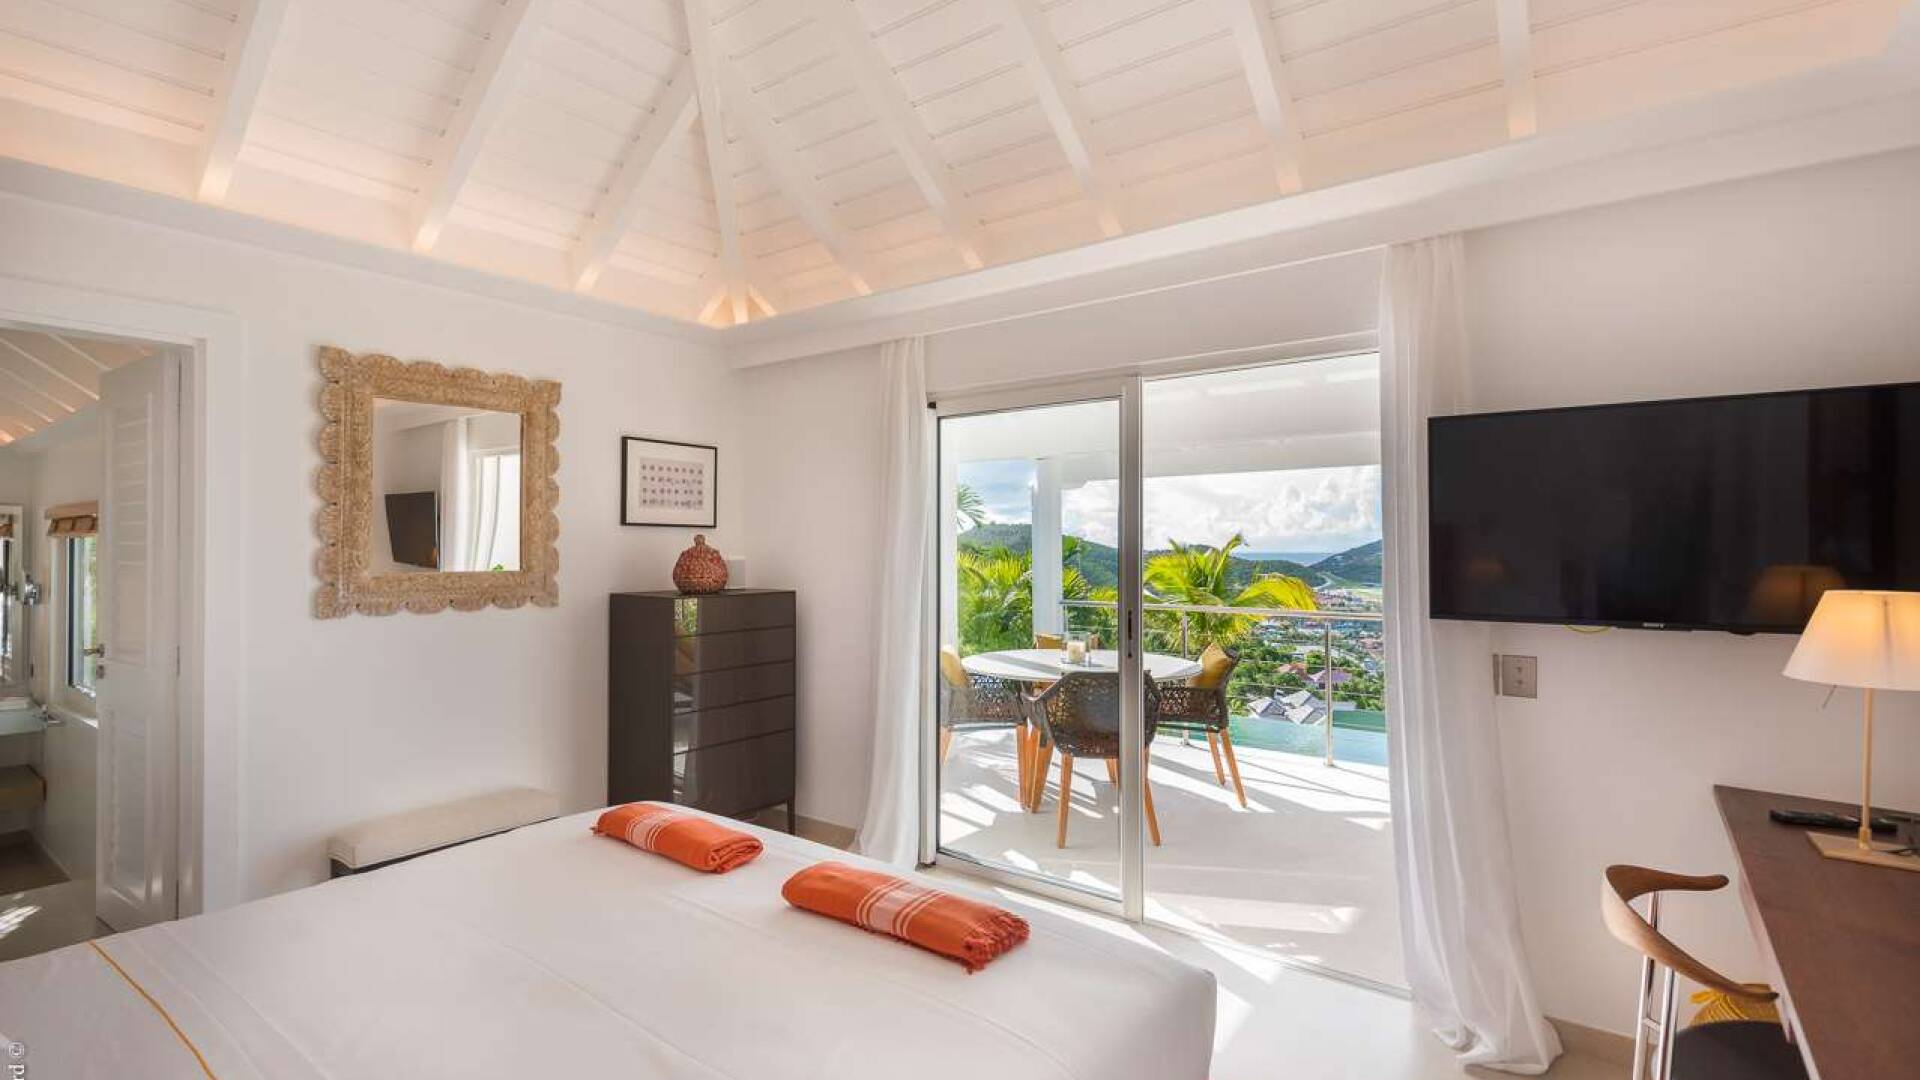 Bedroom at WV LLA, St. Jean, St. Barthelemy